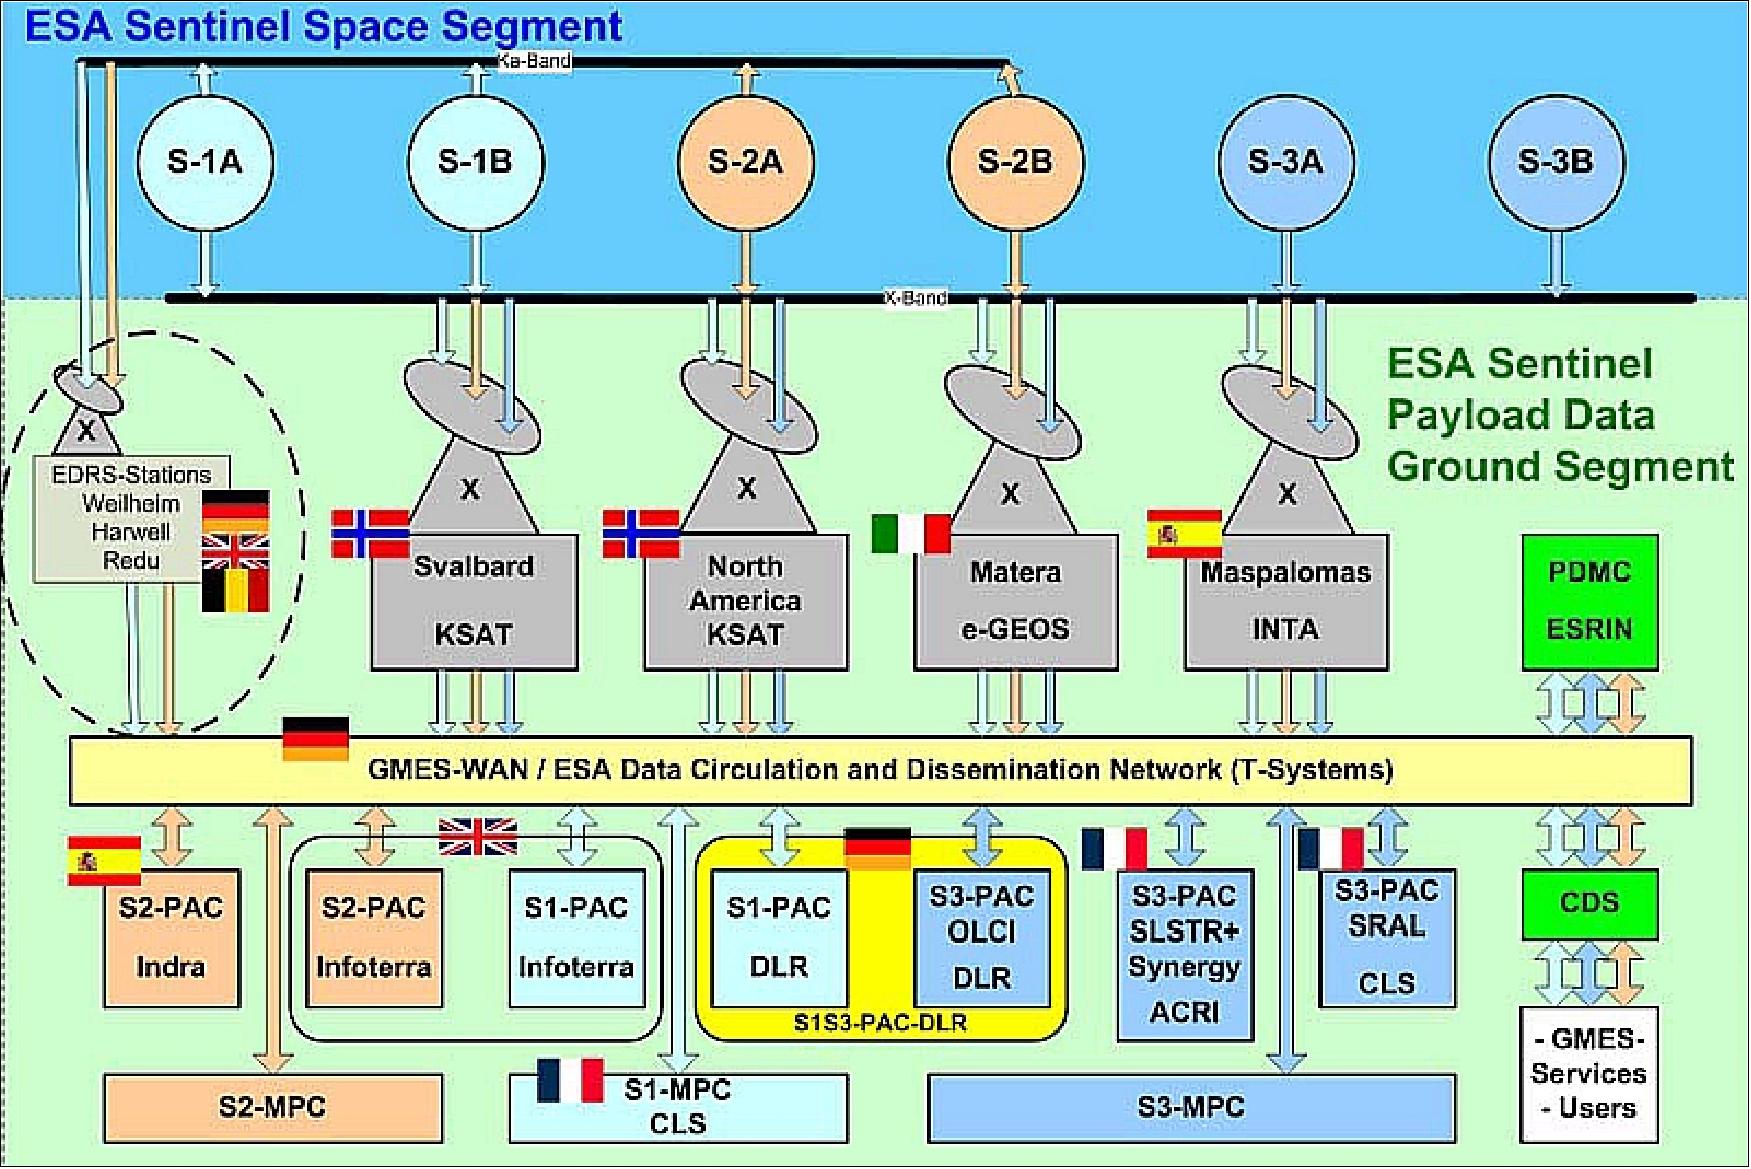 Overall structure of Copernicus Payload Data Ground Segment for Sentinels-1 to -3